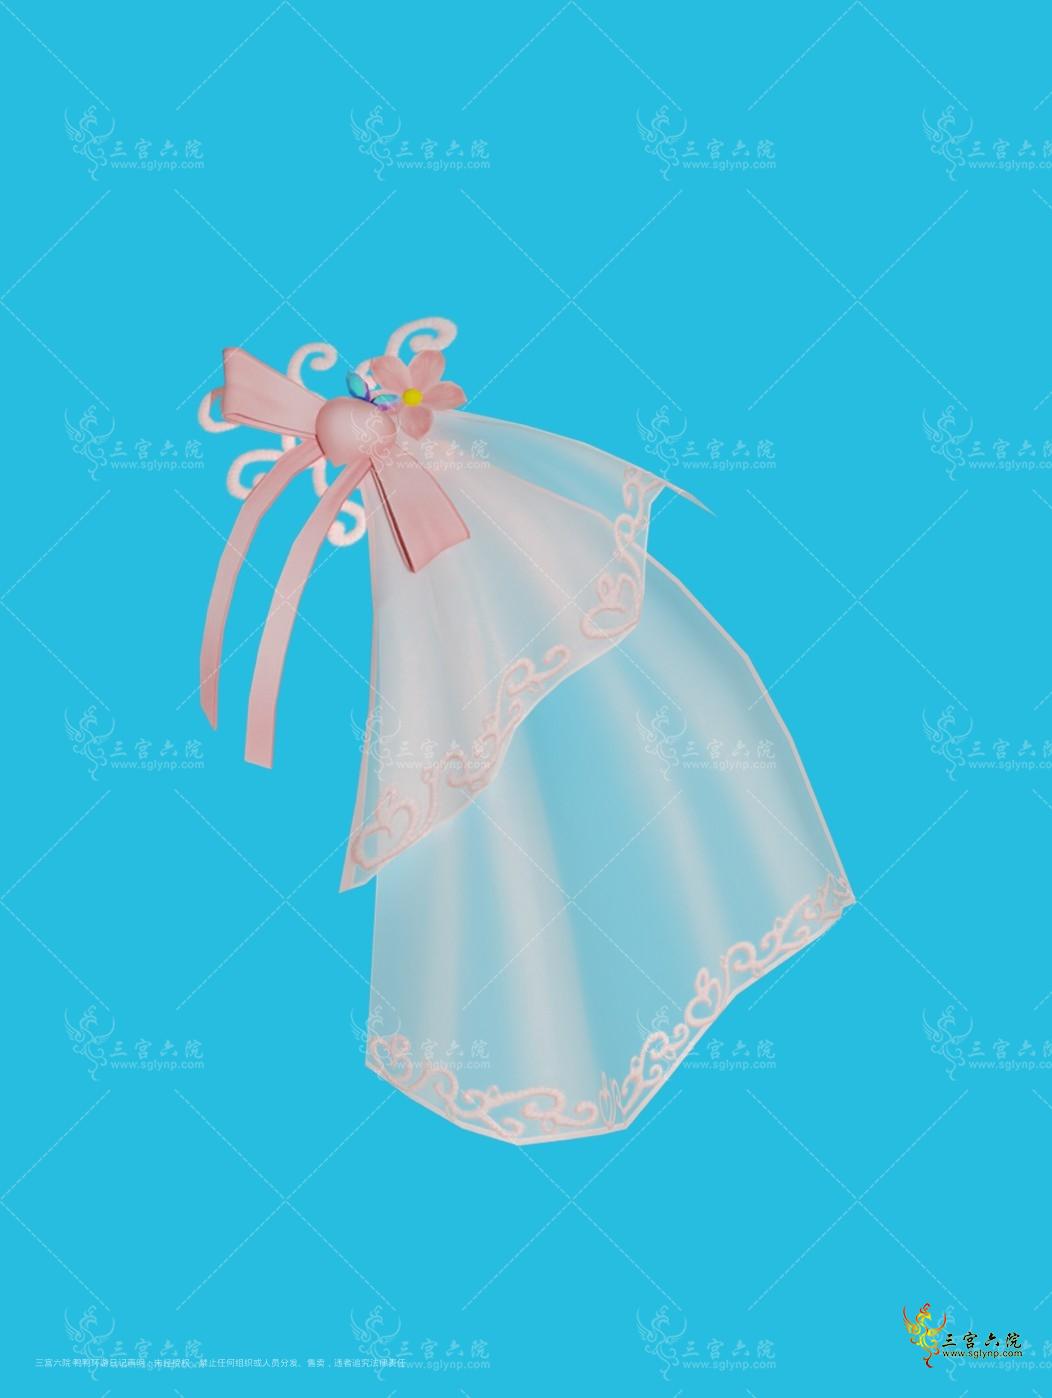 Dolce Peach veil preview.png